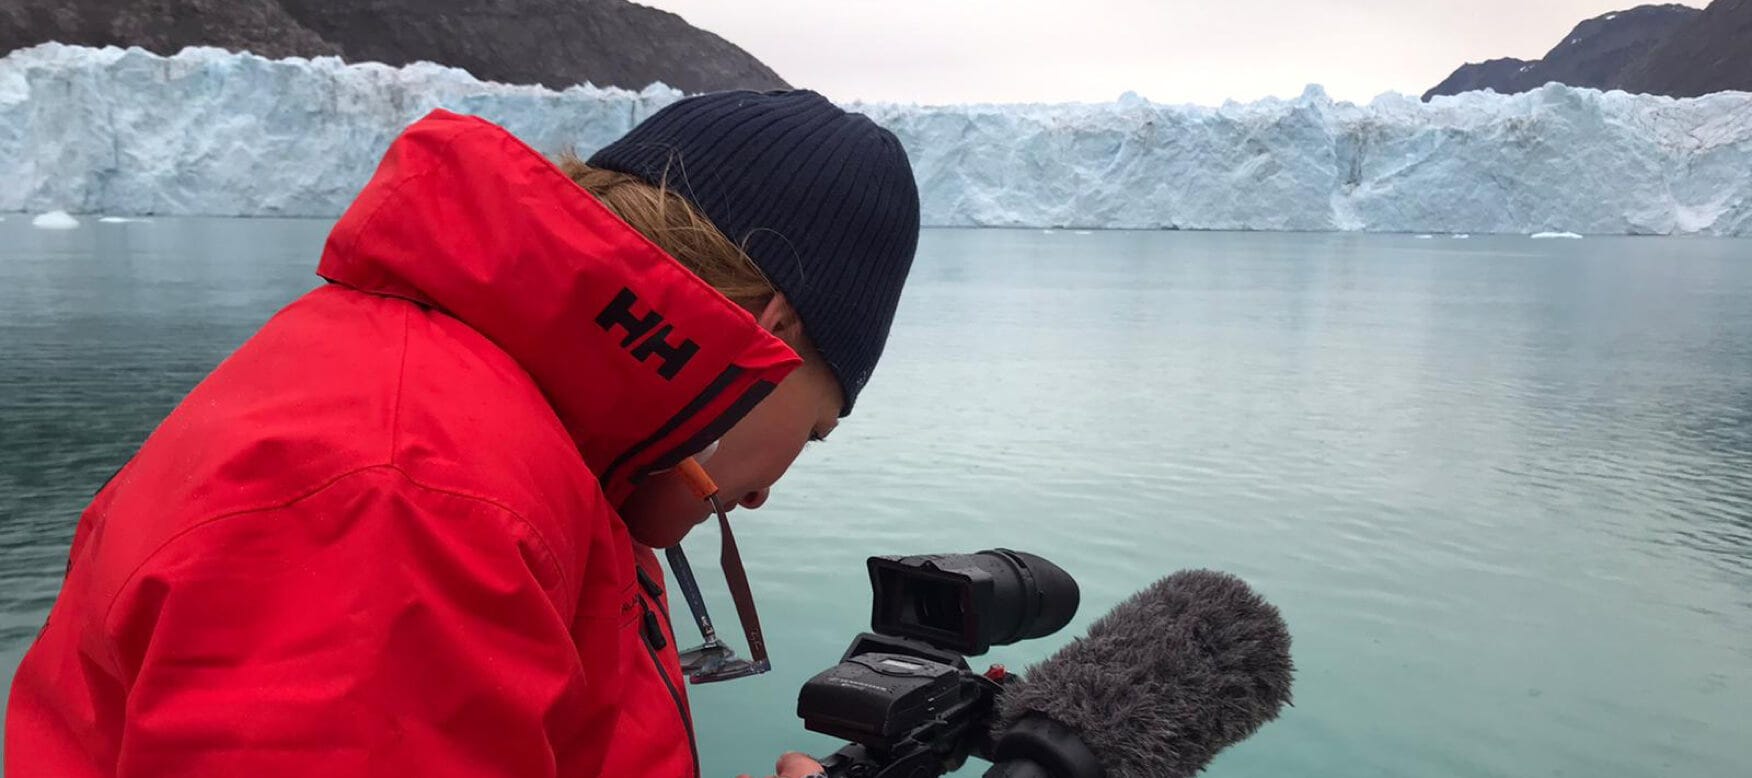 filming the icebergs